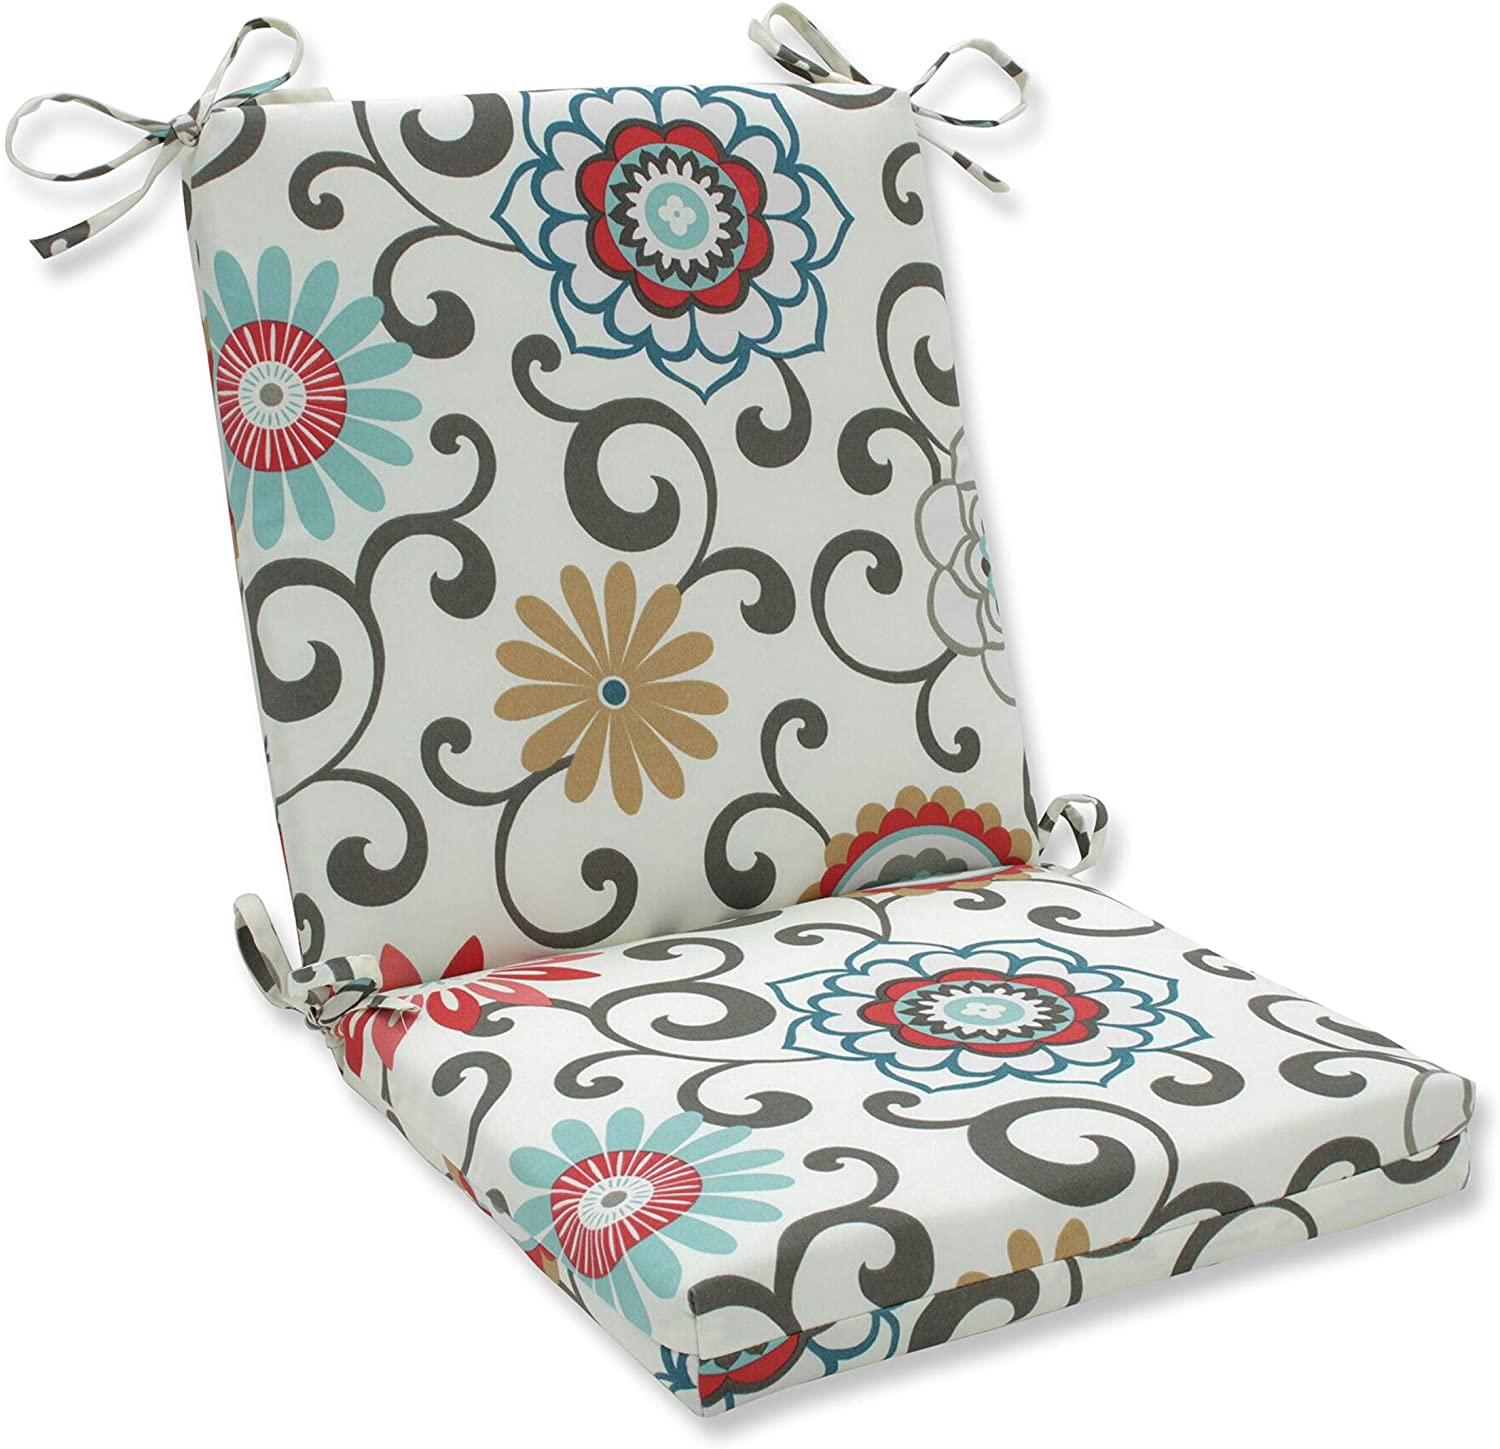 Pillow Perfect Outdoor Square Corners Patio Chair Cushion